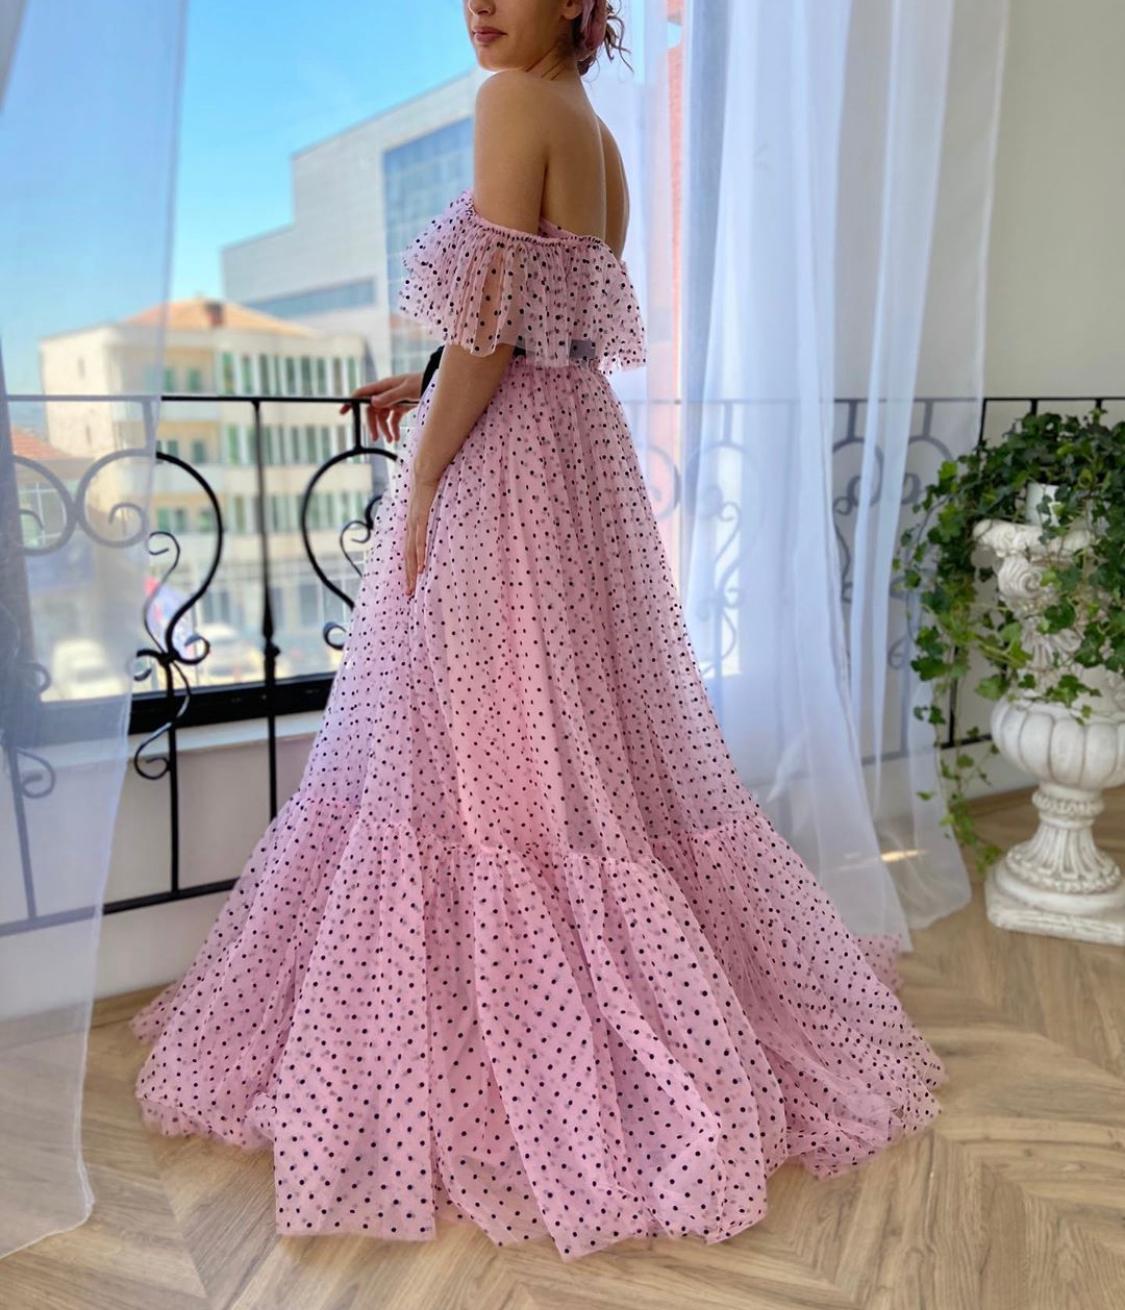 Pink A-Line dotted dress with spaghetti straps and off the shoulder sleeves